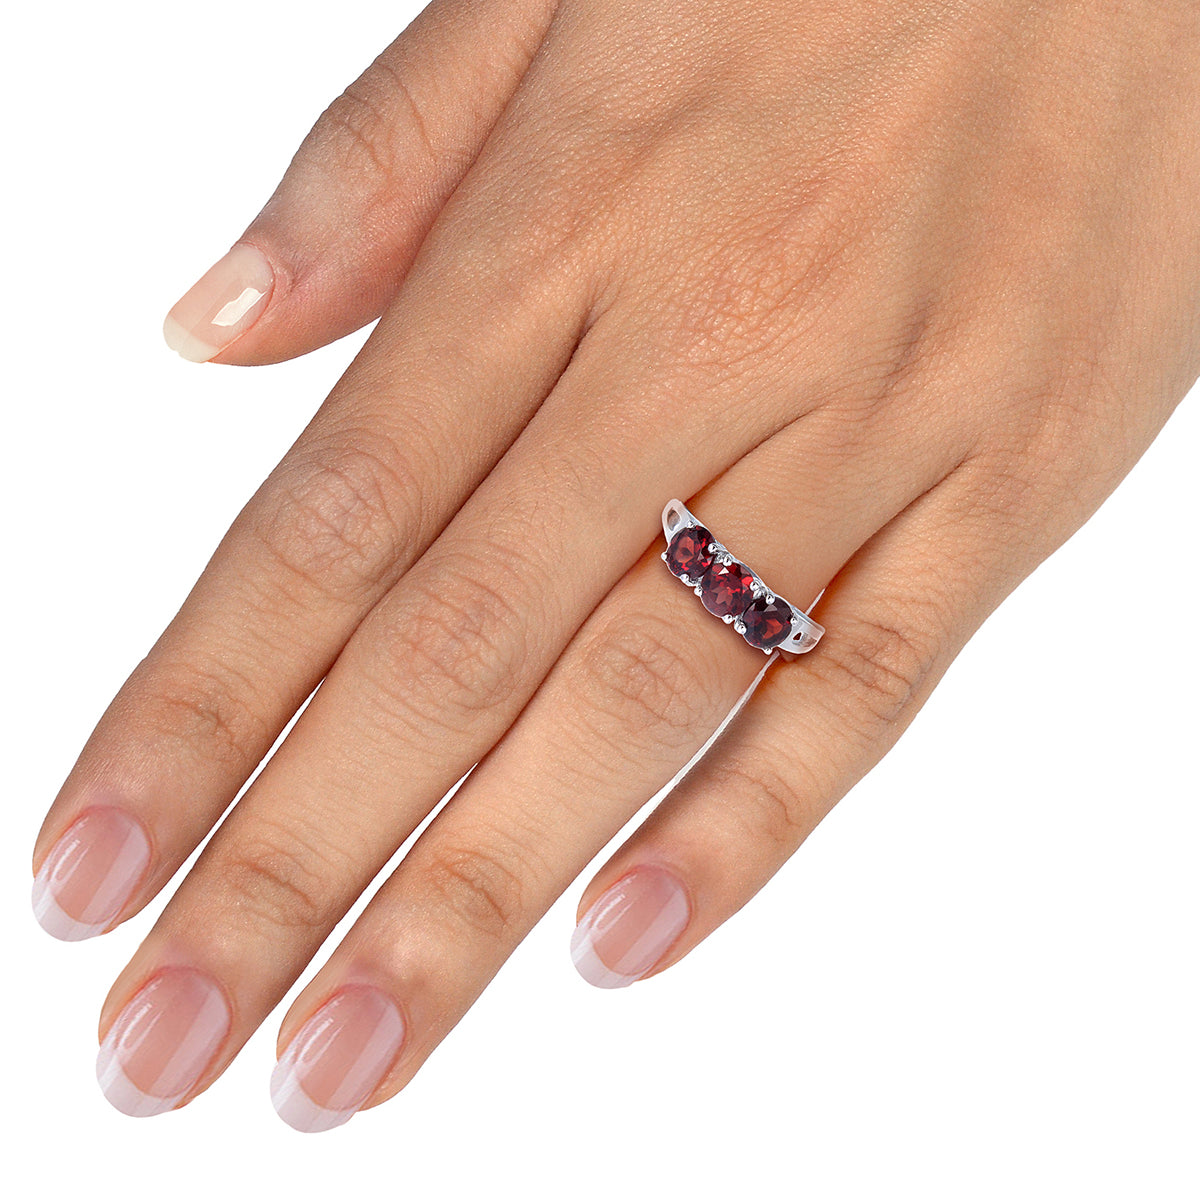 1.70 cttw 3 Stone Garnet Ring in .925 Sterling Silver with Rhodium Plating Round